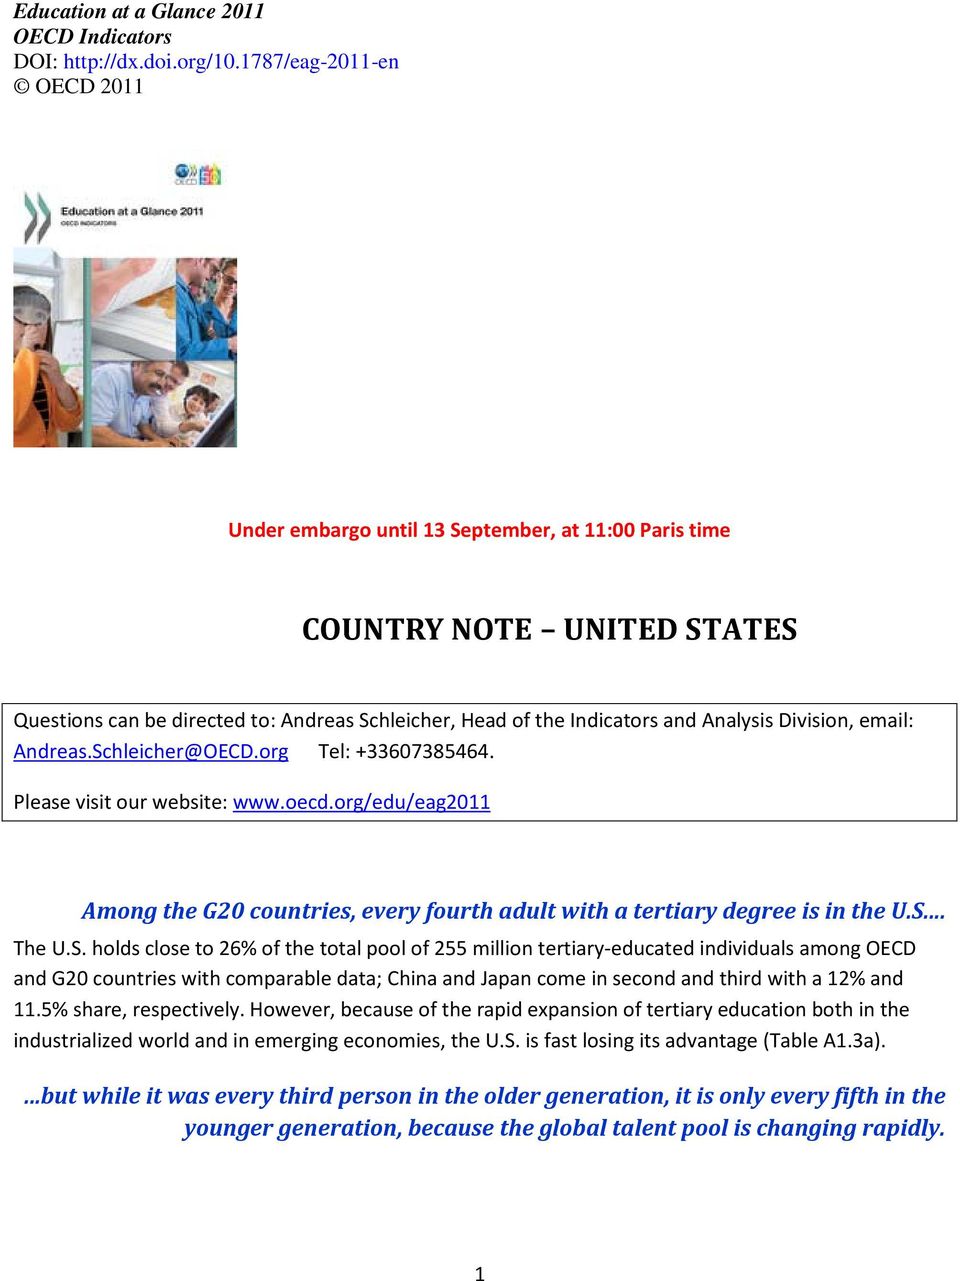 Division, email: Andreas.Schleicher@OECD.org Tel: +33607385464. Please visit our website: www.oecd.org/edu/eag2011 Among the G20 countries, every fourth adult with a tertiary degree is in the U.S... The U.